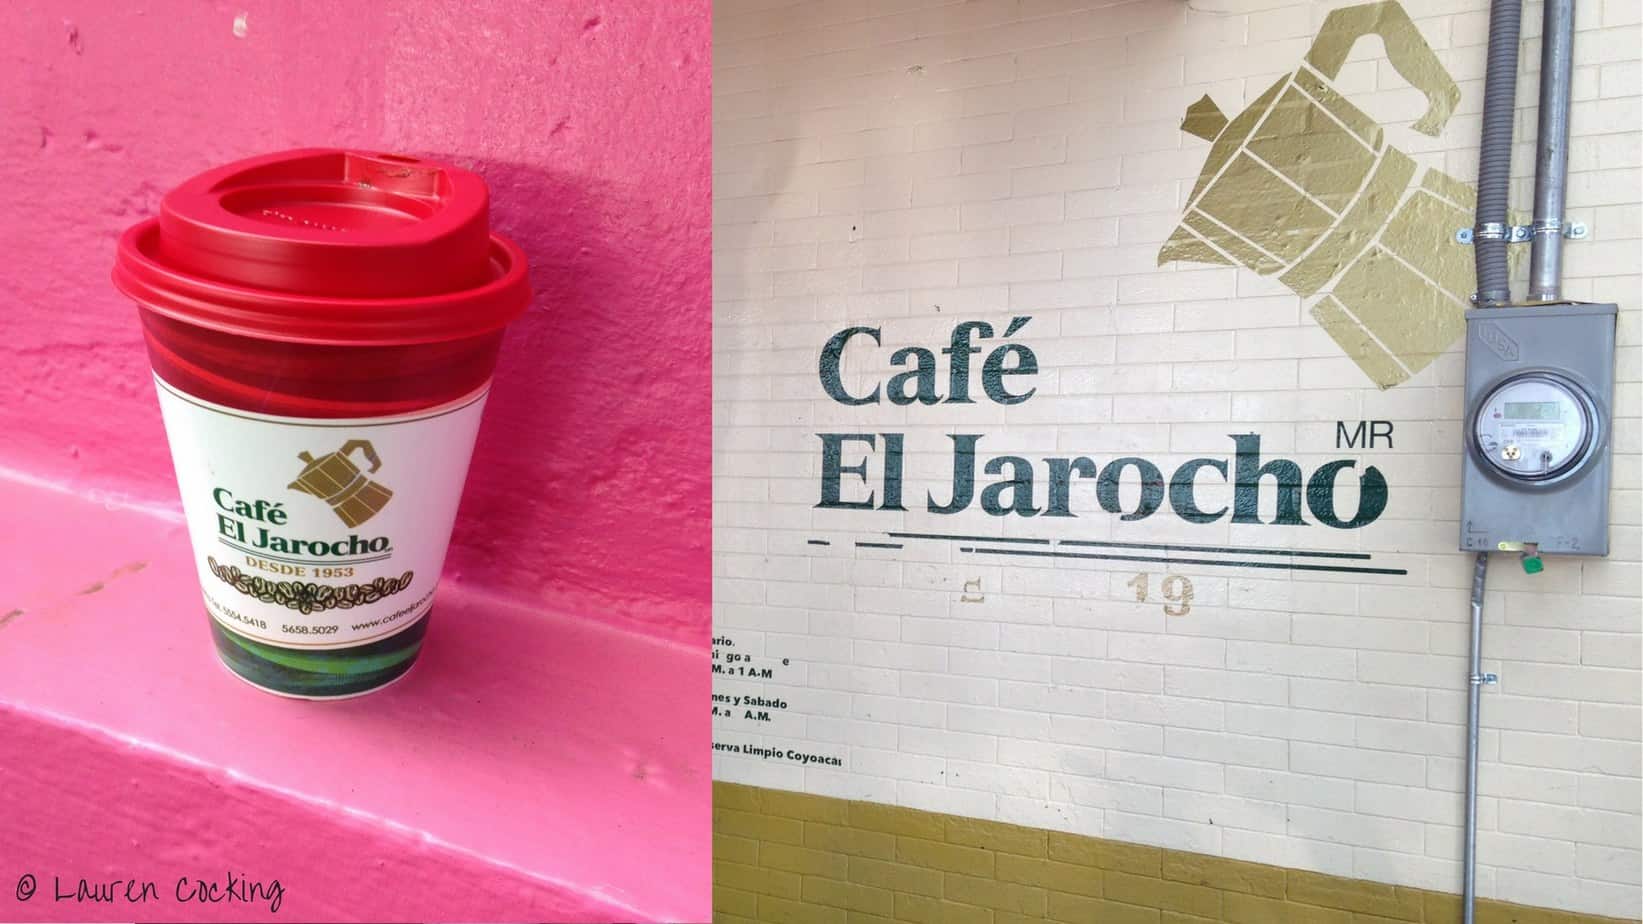 Two images juxtaposed. One is of a to go cup of coffee next to a pink wall. The other is art on the wall that says Cafe El Jarocho